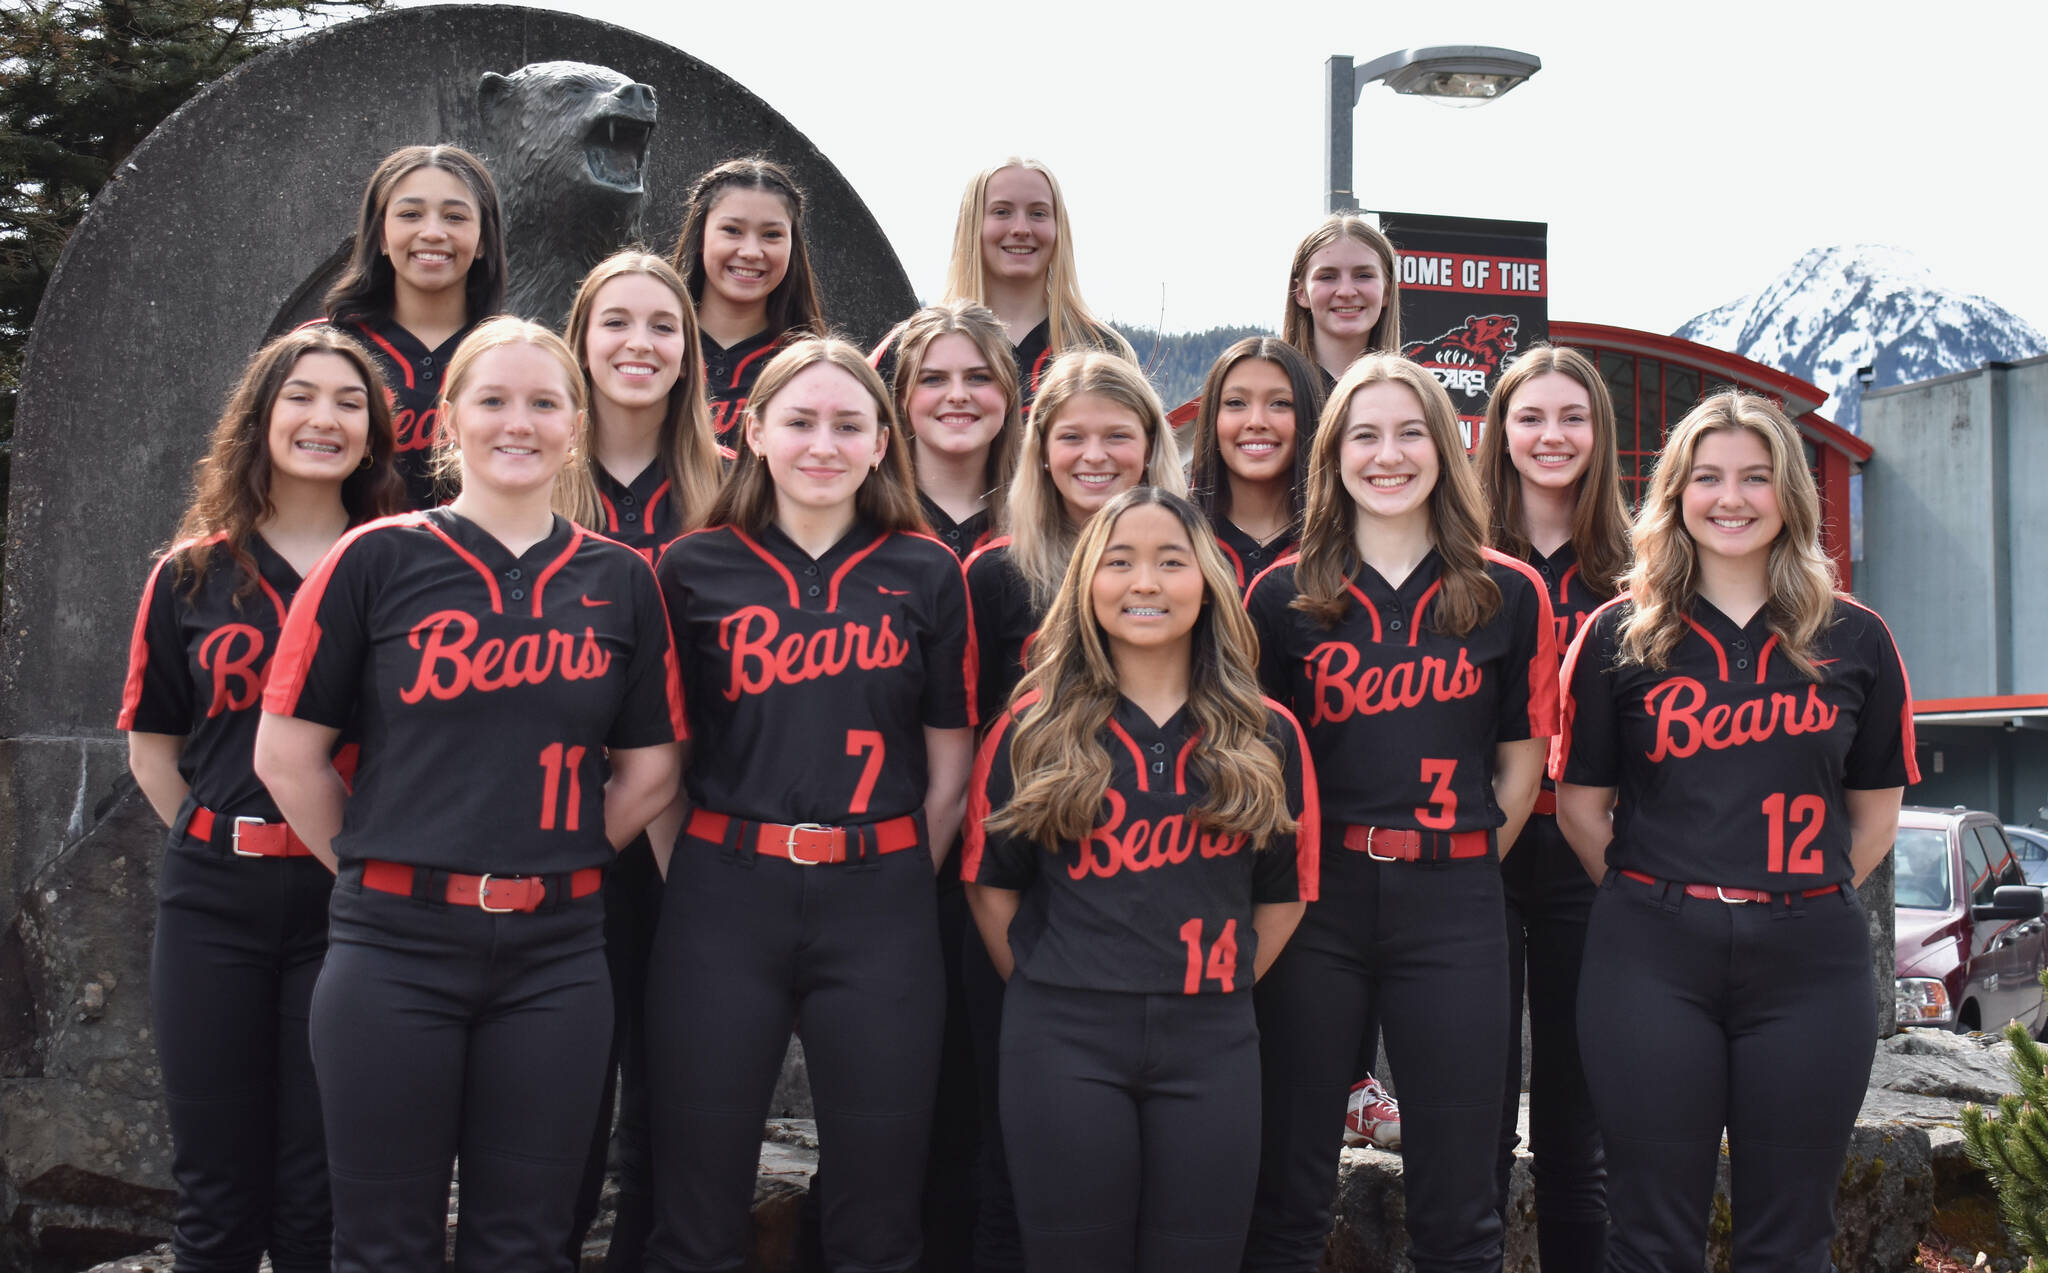 The Region V champion Juneau-Douglas High School: Yadaa.at Kalé Crimson Bears softball team are the top Southeast seed for the state tournament this weekend in Anchorage. Front row: Milina Mazon. Second row: Mariah Schauwecker, Chloe Casperson, Zoey Billings, Carlynn Casperson and Gloria Bixby. Third row: Bailey Hansen, Mila Hargrave, Taiya Bentz, Kiah Yadao and Gwen Nizich. Fourth row: Amira Andrews, Tristan Oliva, Anna Dale and Tatum Billings. (Klas Stolpe / Juneau Empire)